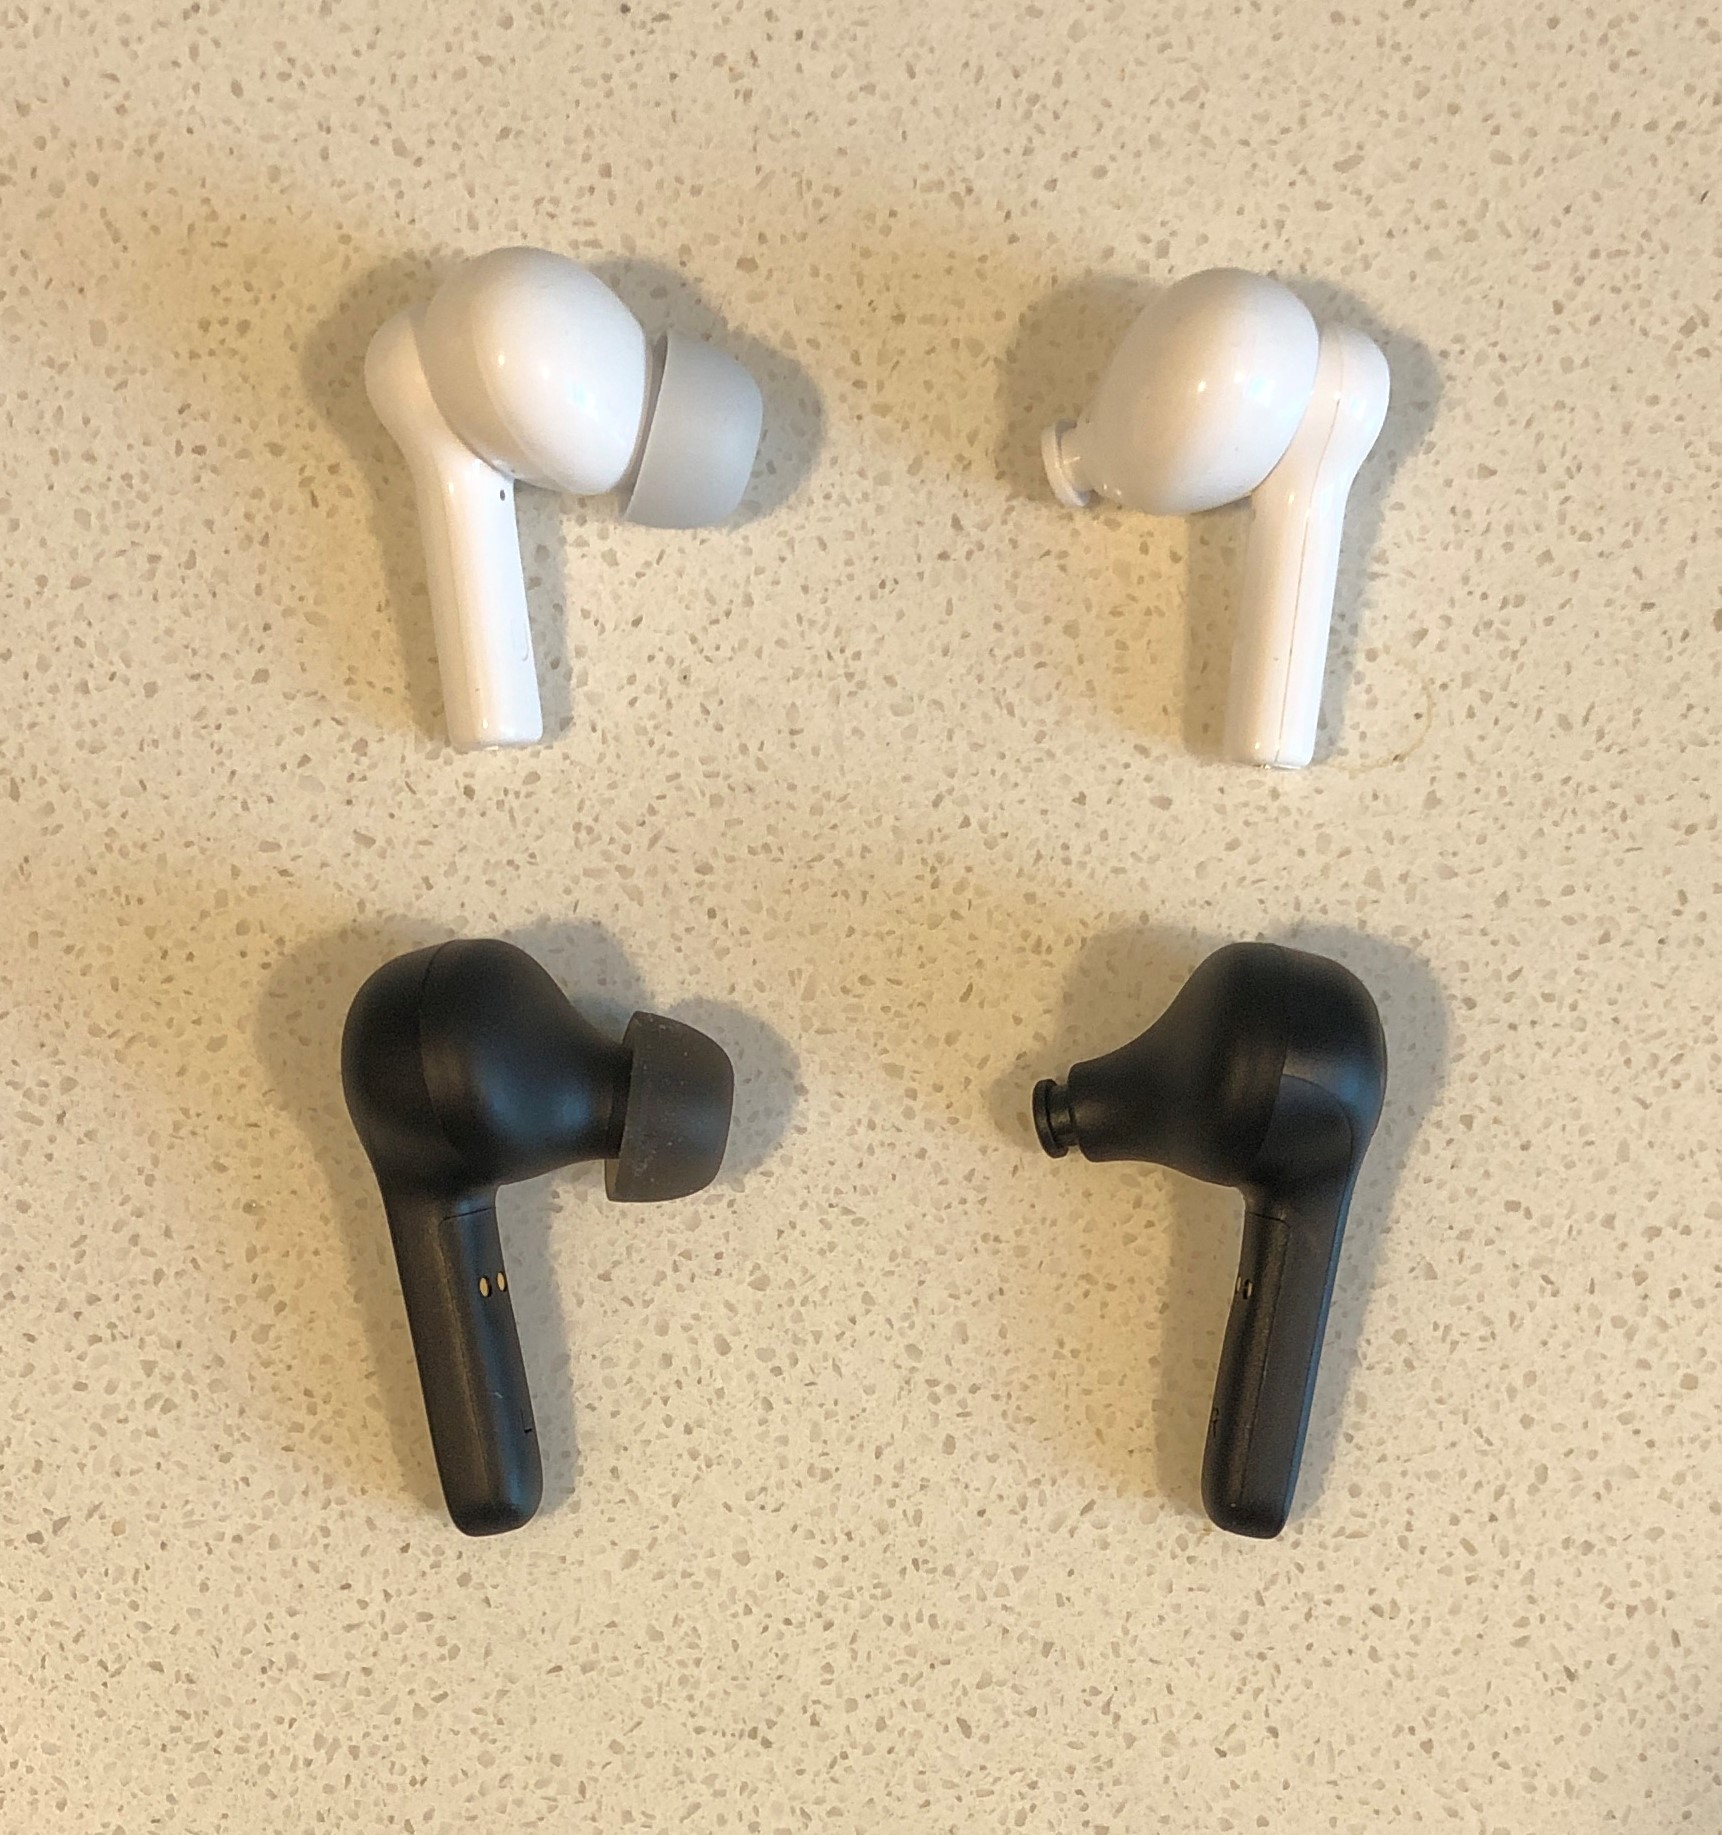 Soundcore Life P2i vs P2 earbud tip and nozzle